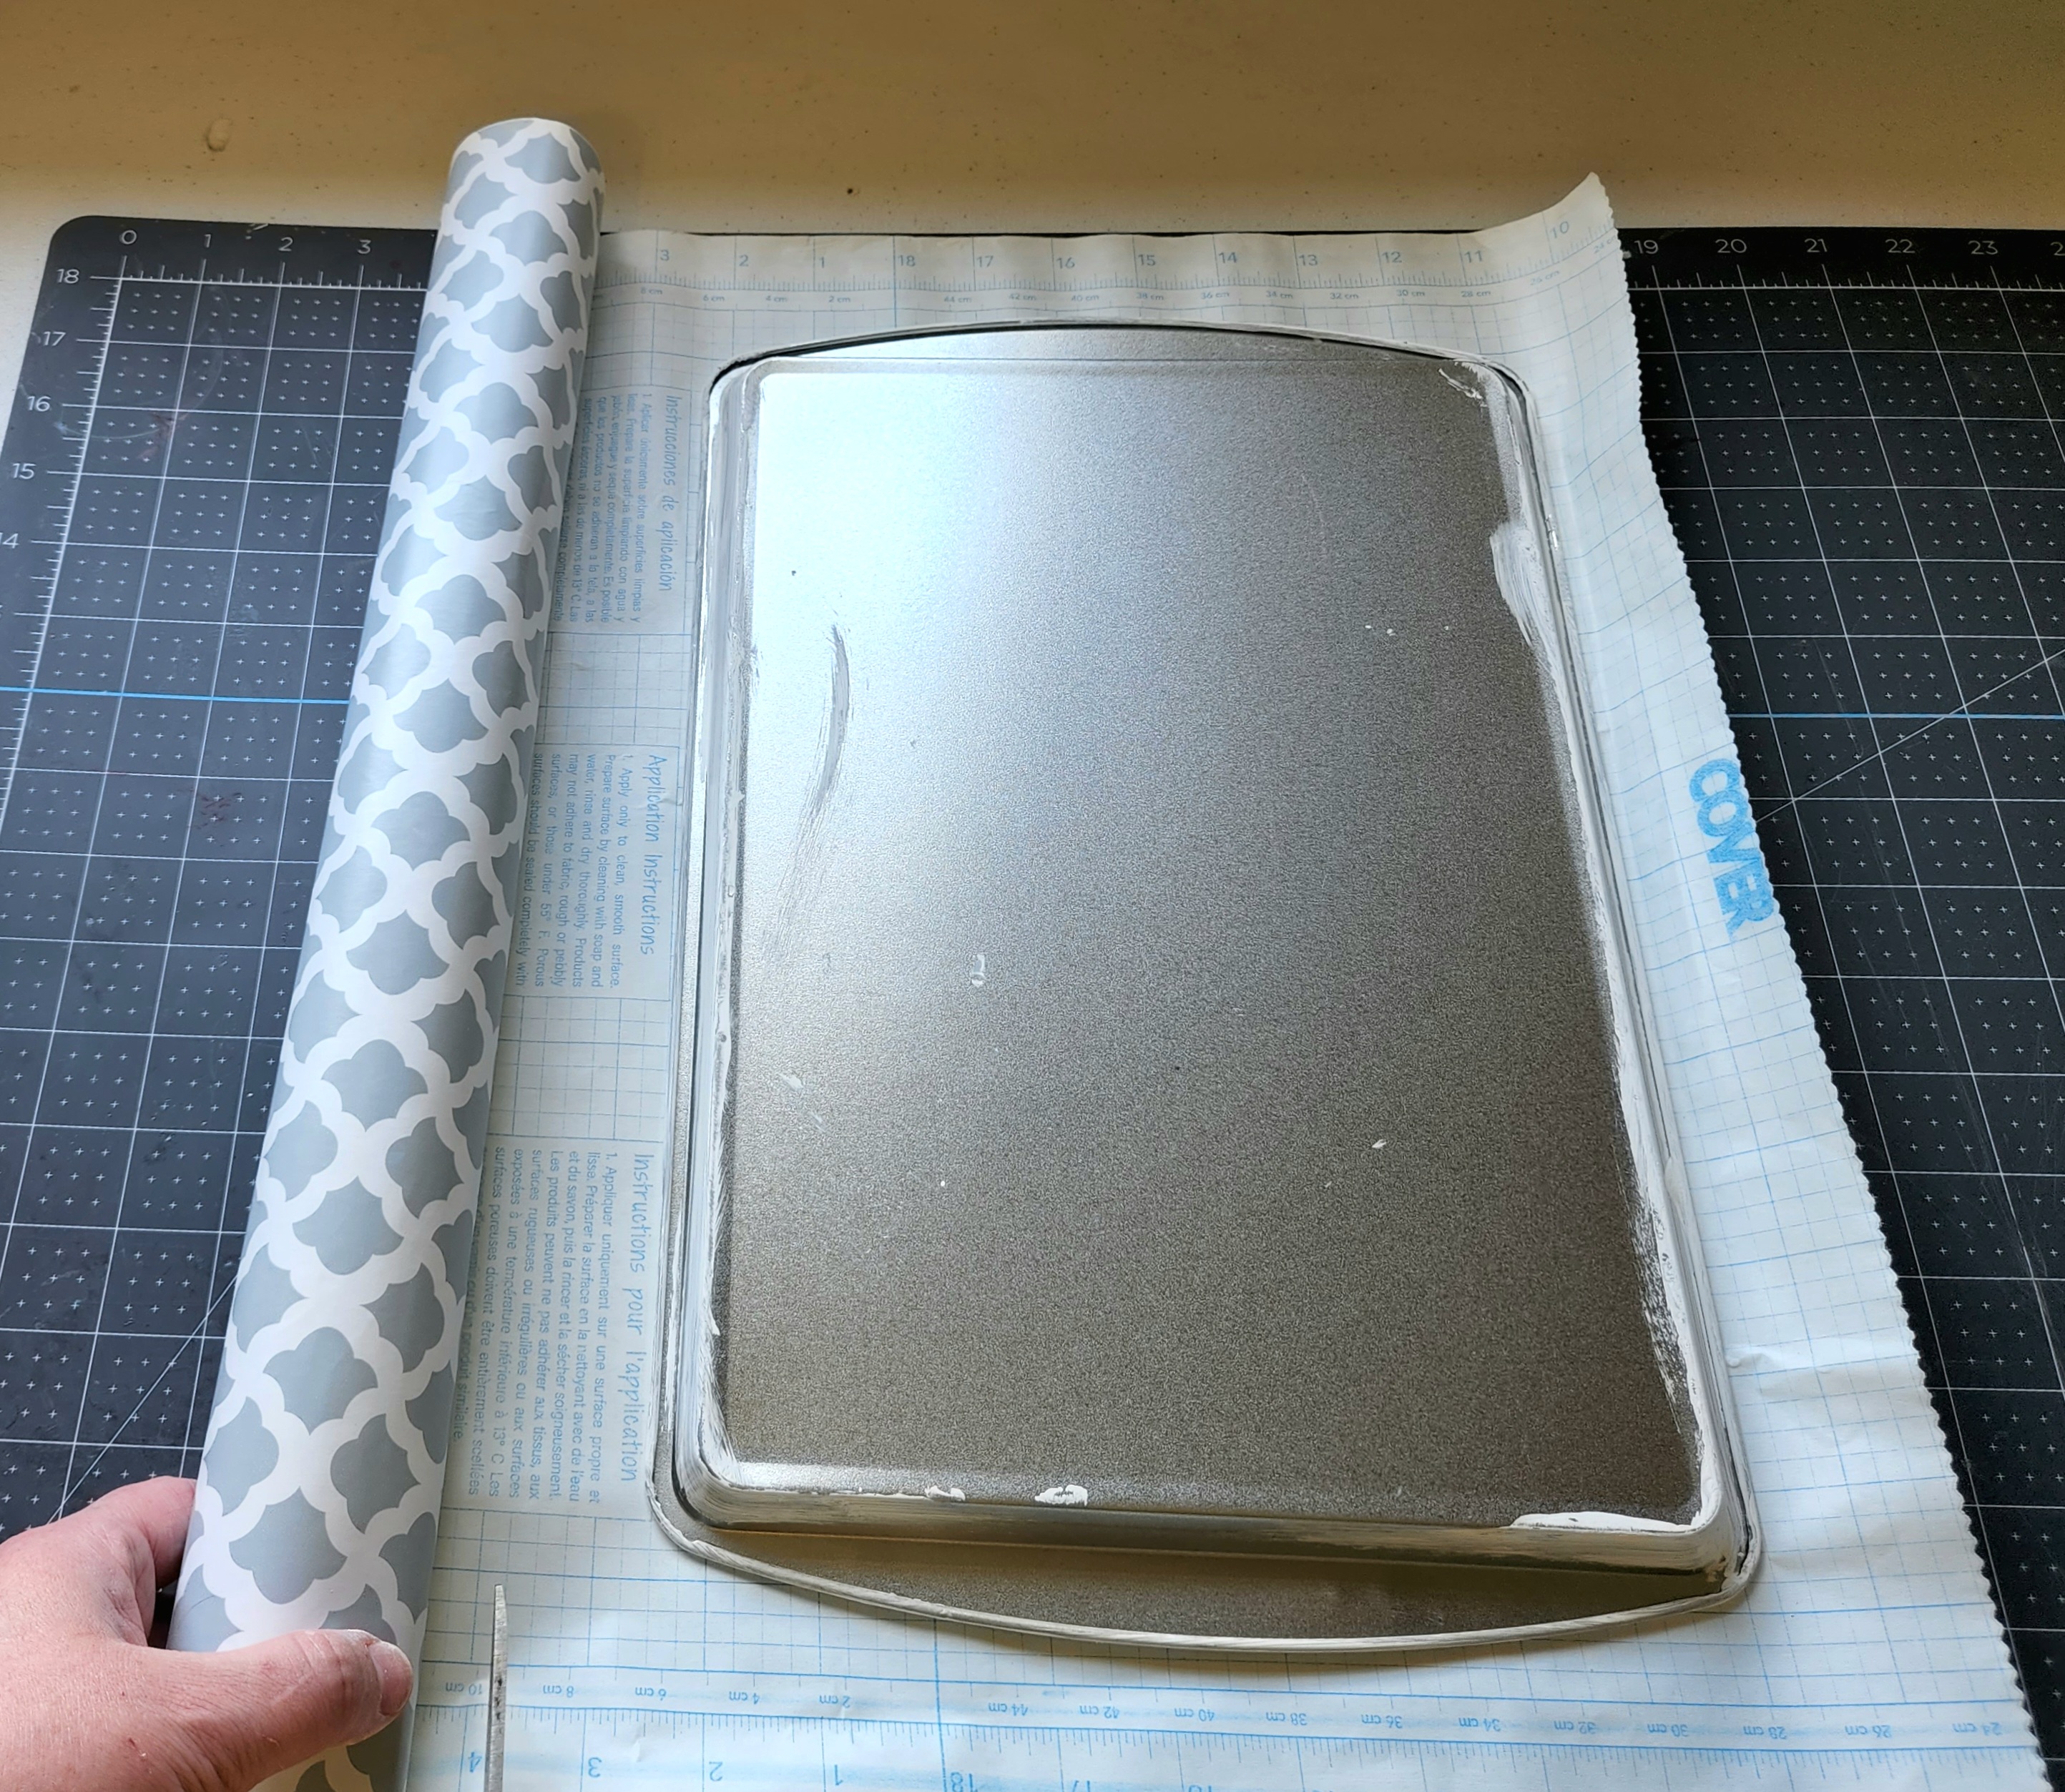 Cutting contact paper to cover the baking sheet.